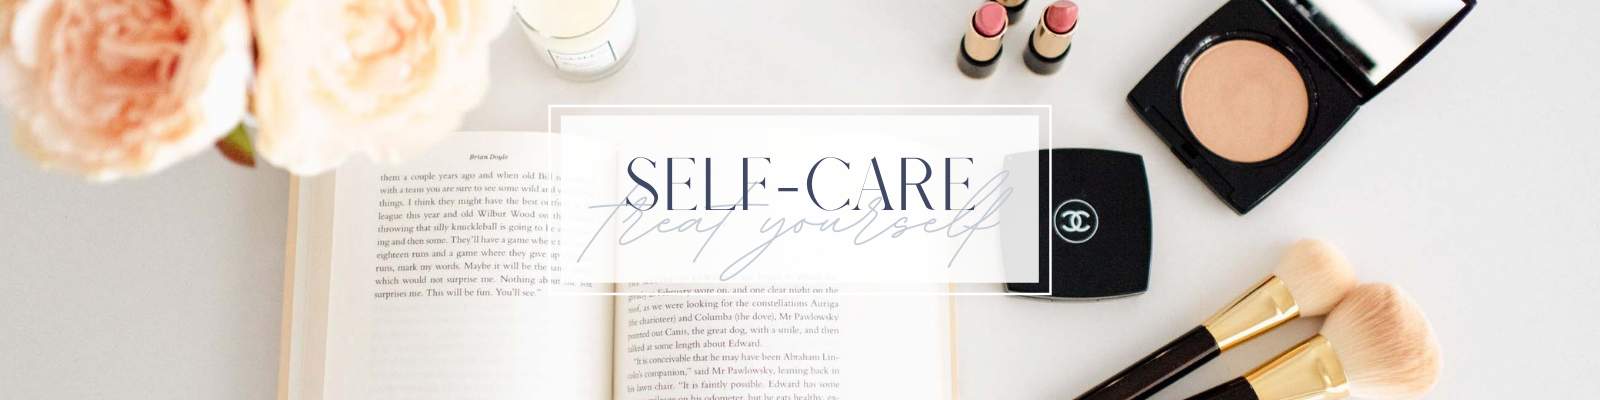 SelfCare-AB-Category